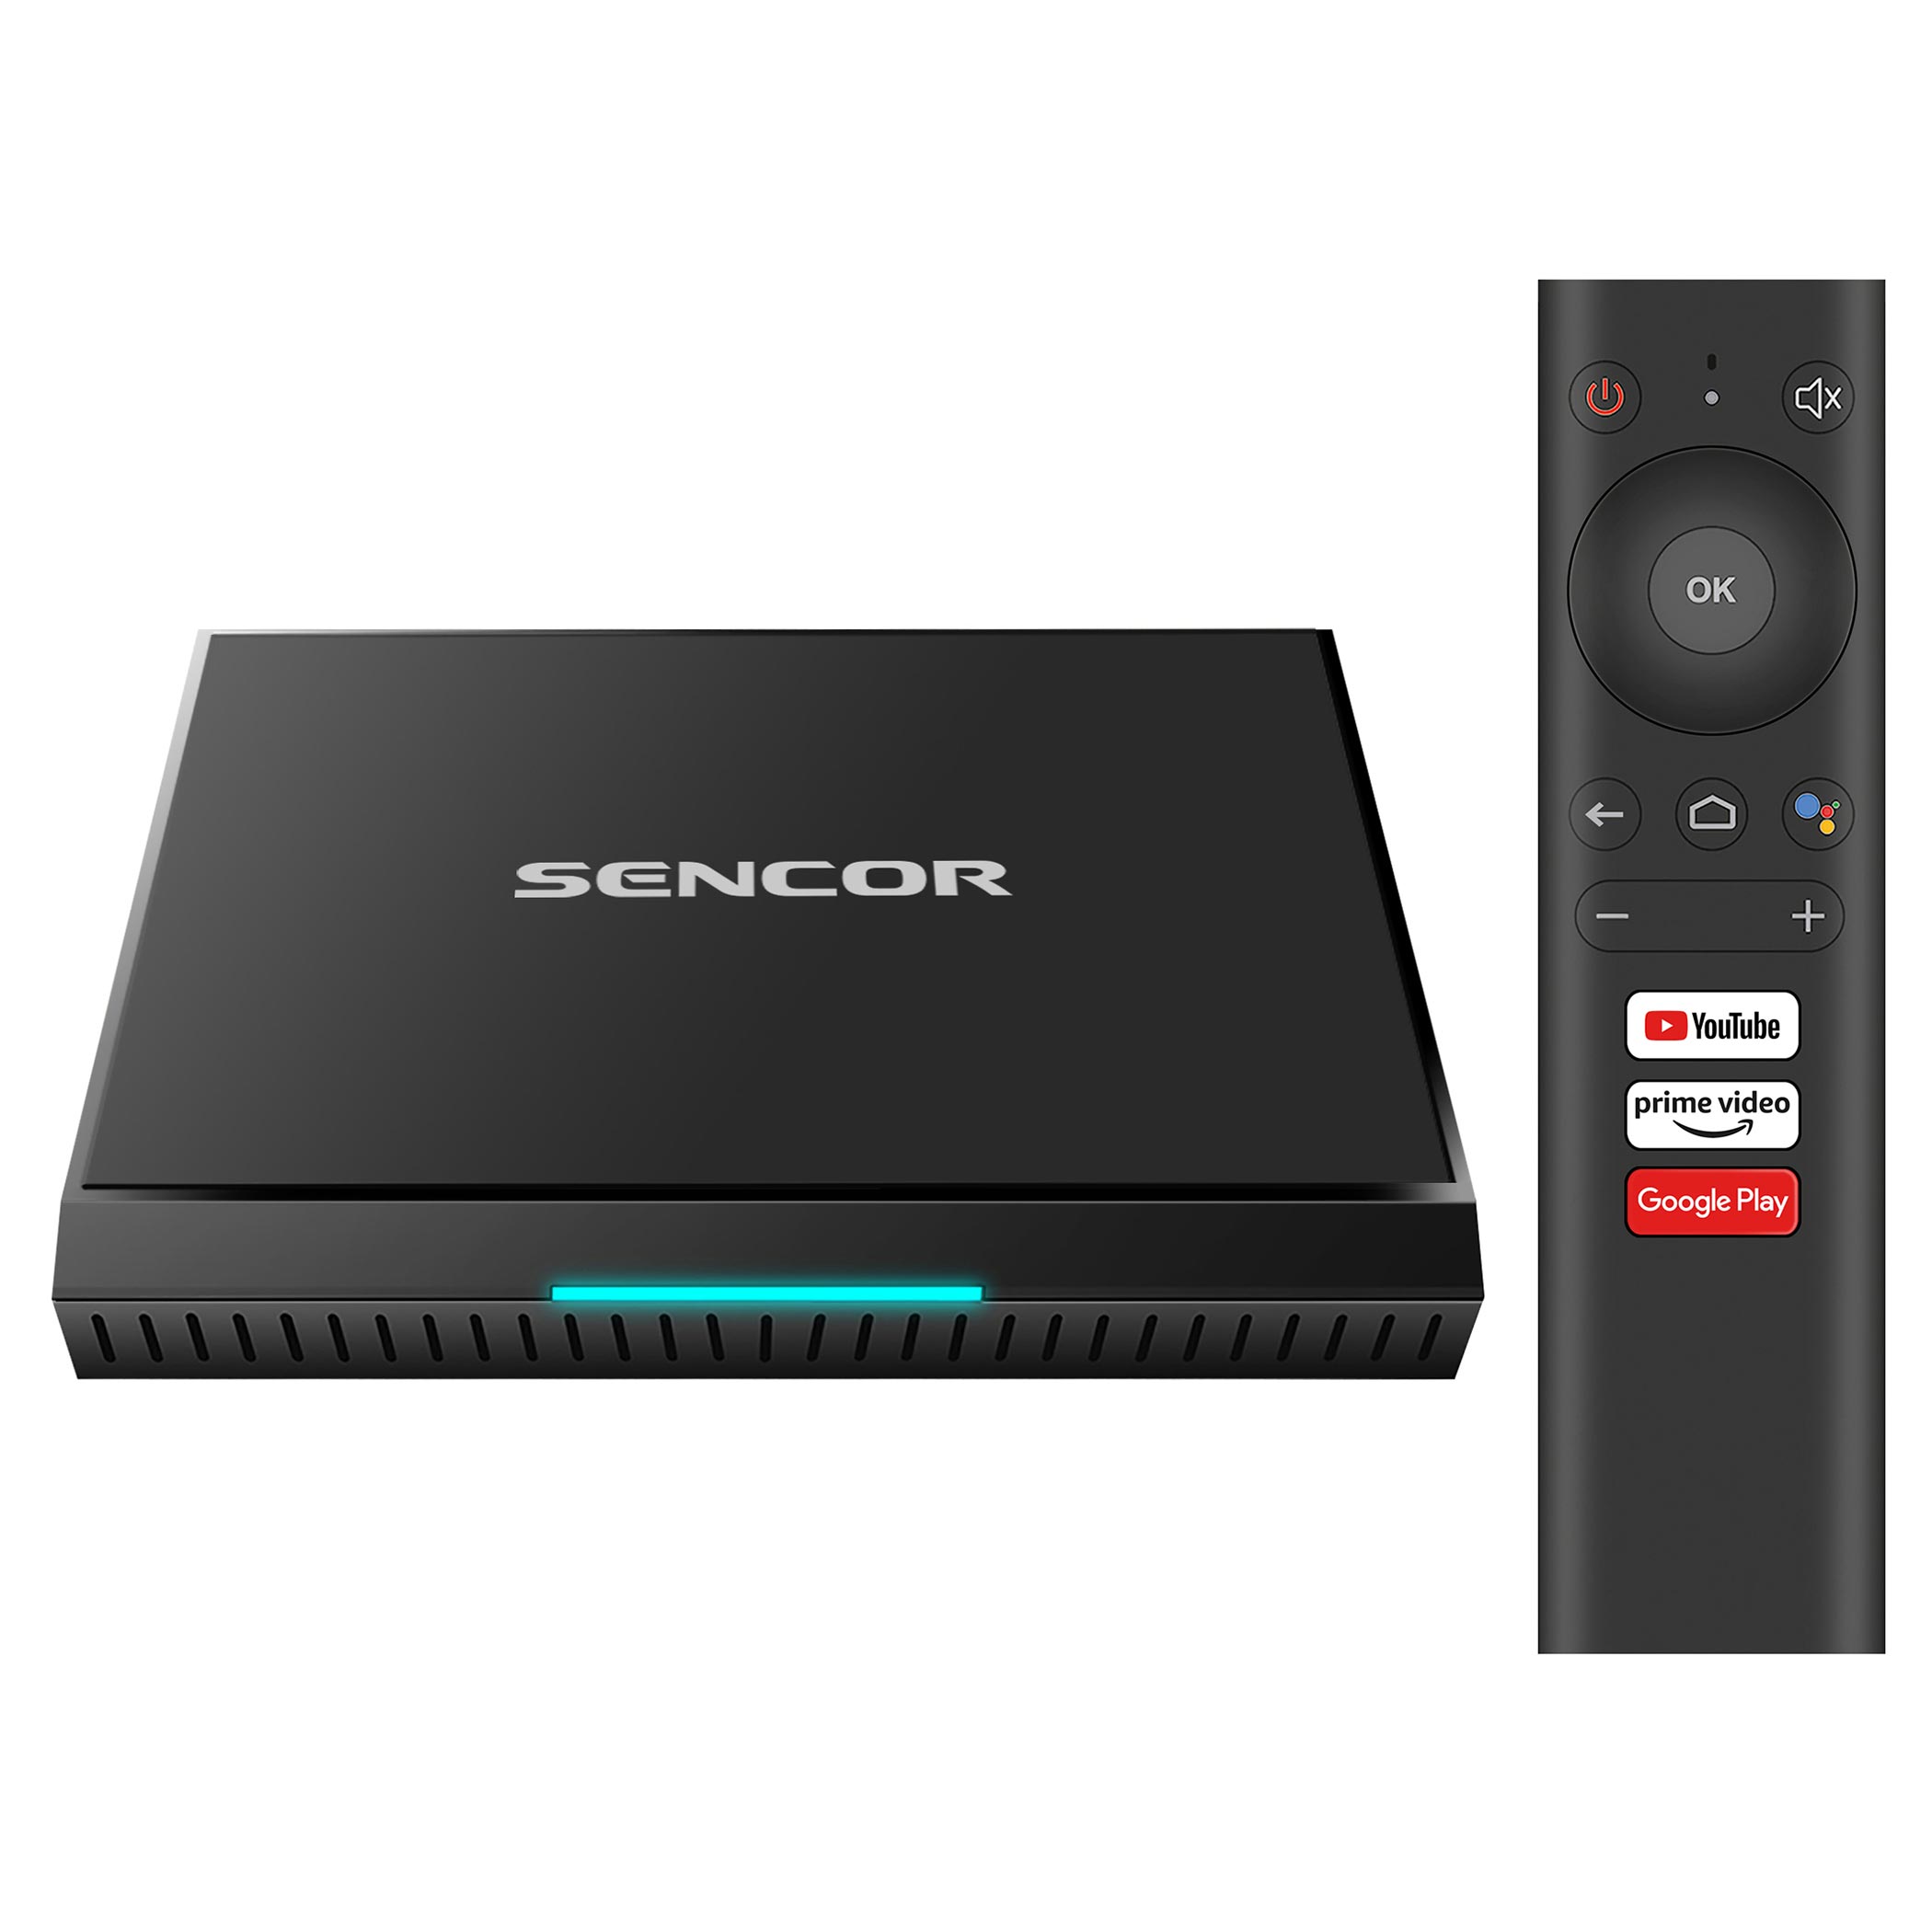 Certified Android TV Platform - Android 10, SMP ATV2